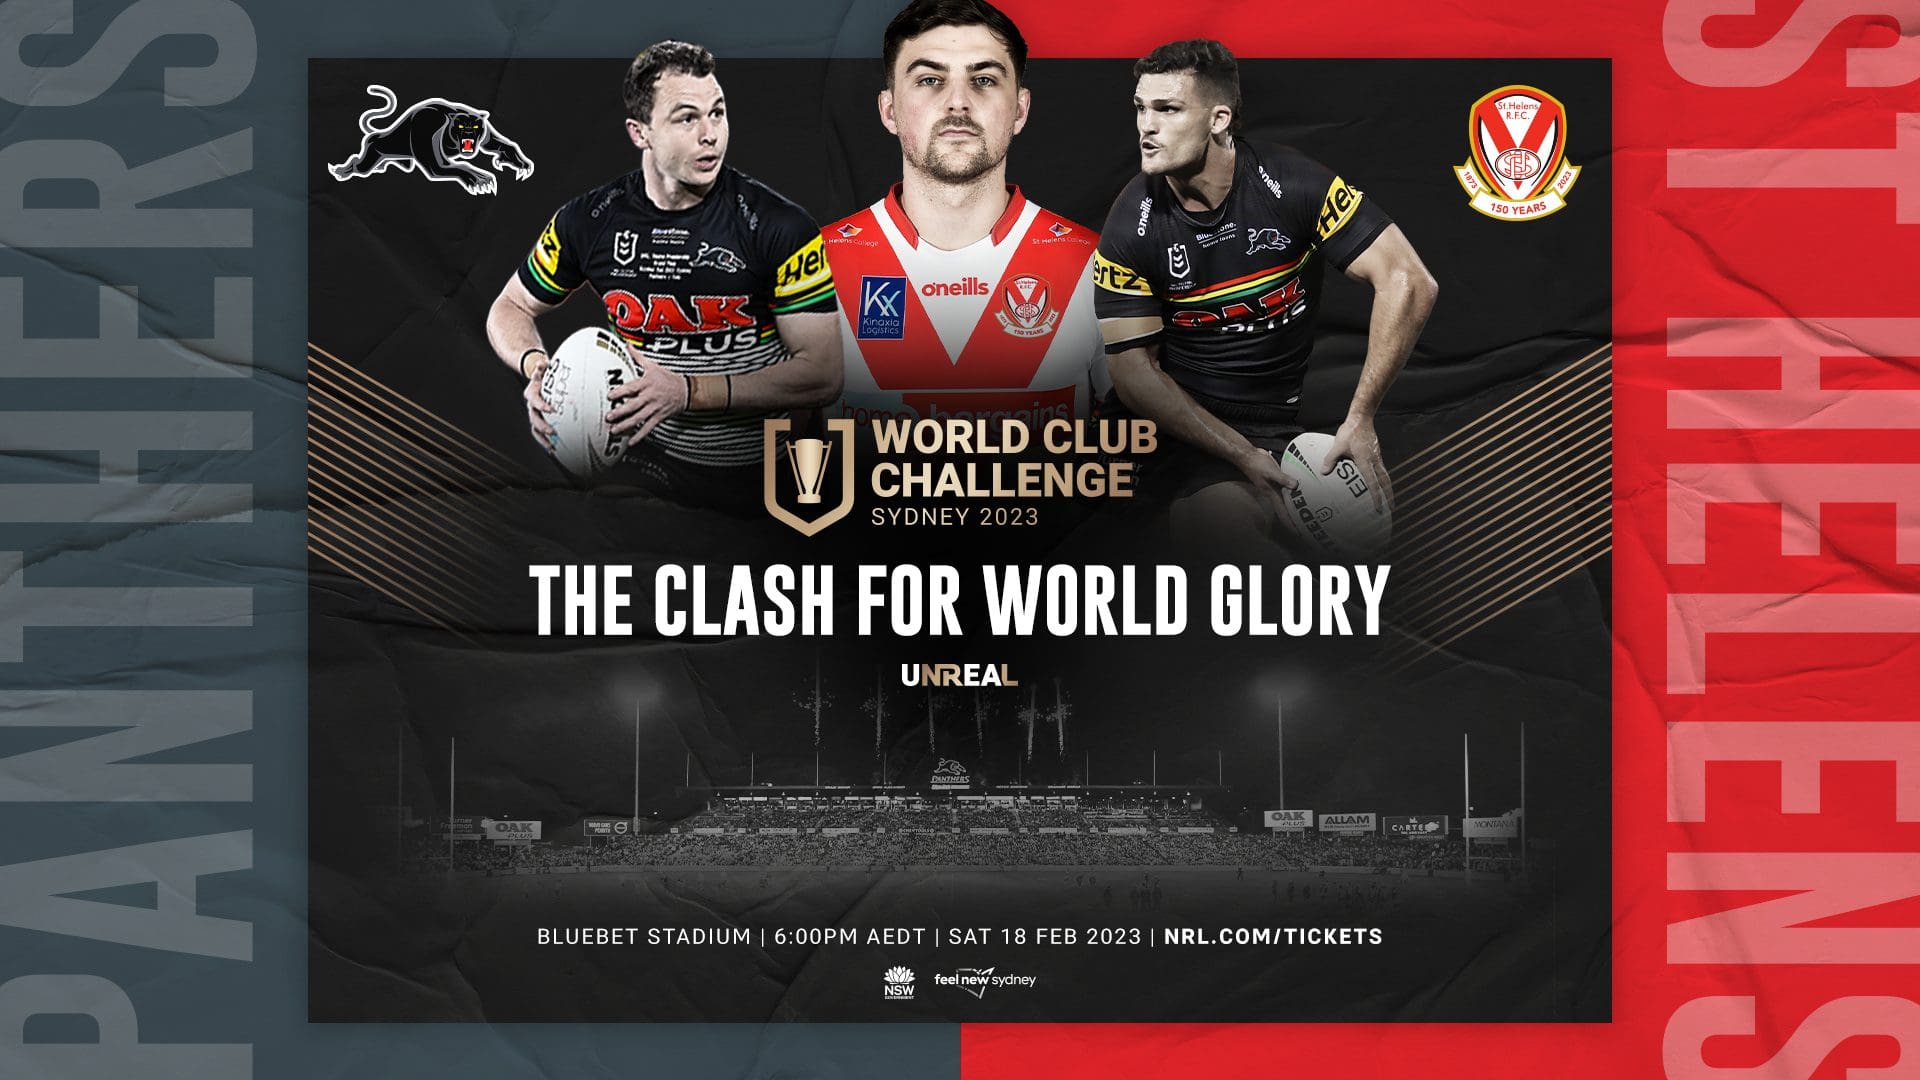 Saints World Club Challenge live on Sky and Channel 4 St.Helens R.F.C.